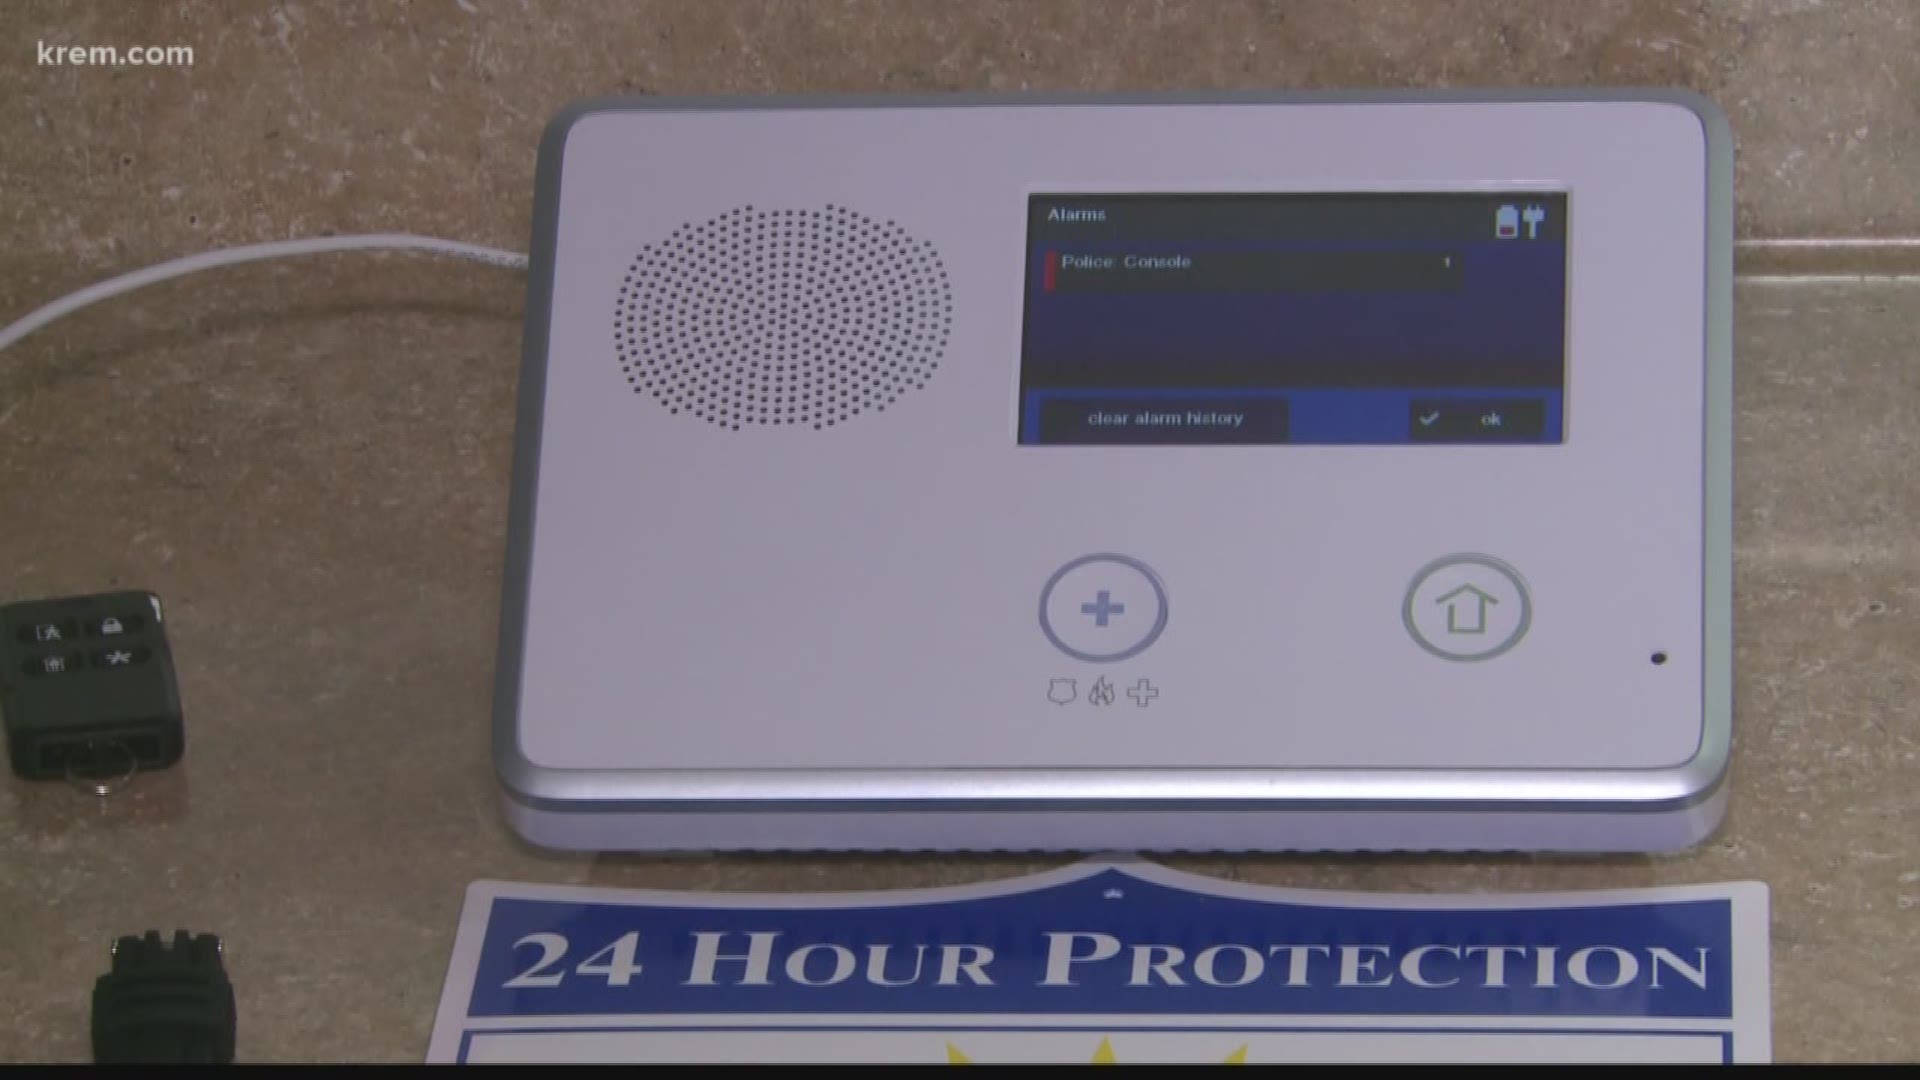 KREM Reporter Taylor Viydo spoke with a local home security business owner about what panic buttons do and how they work.